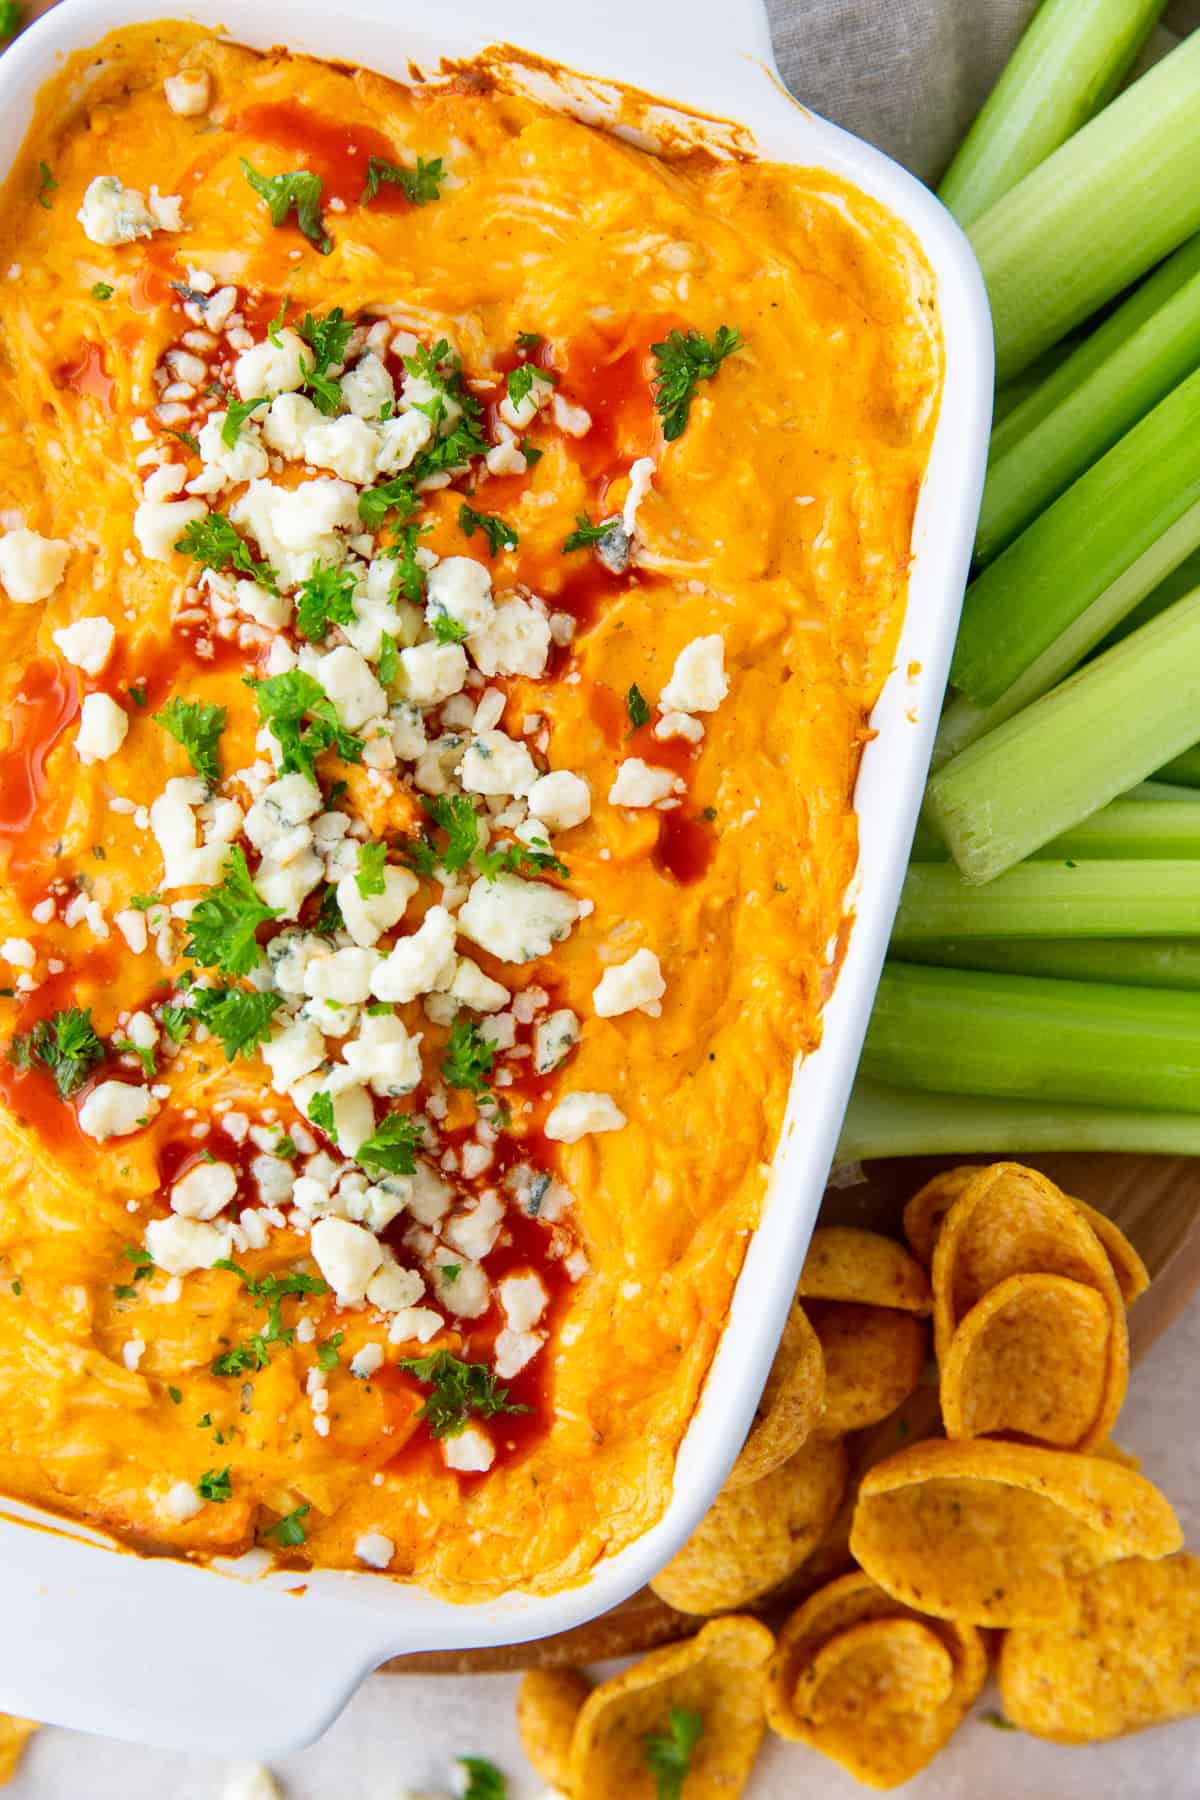 Buffalo Chicken Dip garnished with blue cheese and Frank's Red Hot in a baking dish next to celery and Frito's Scoops.